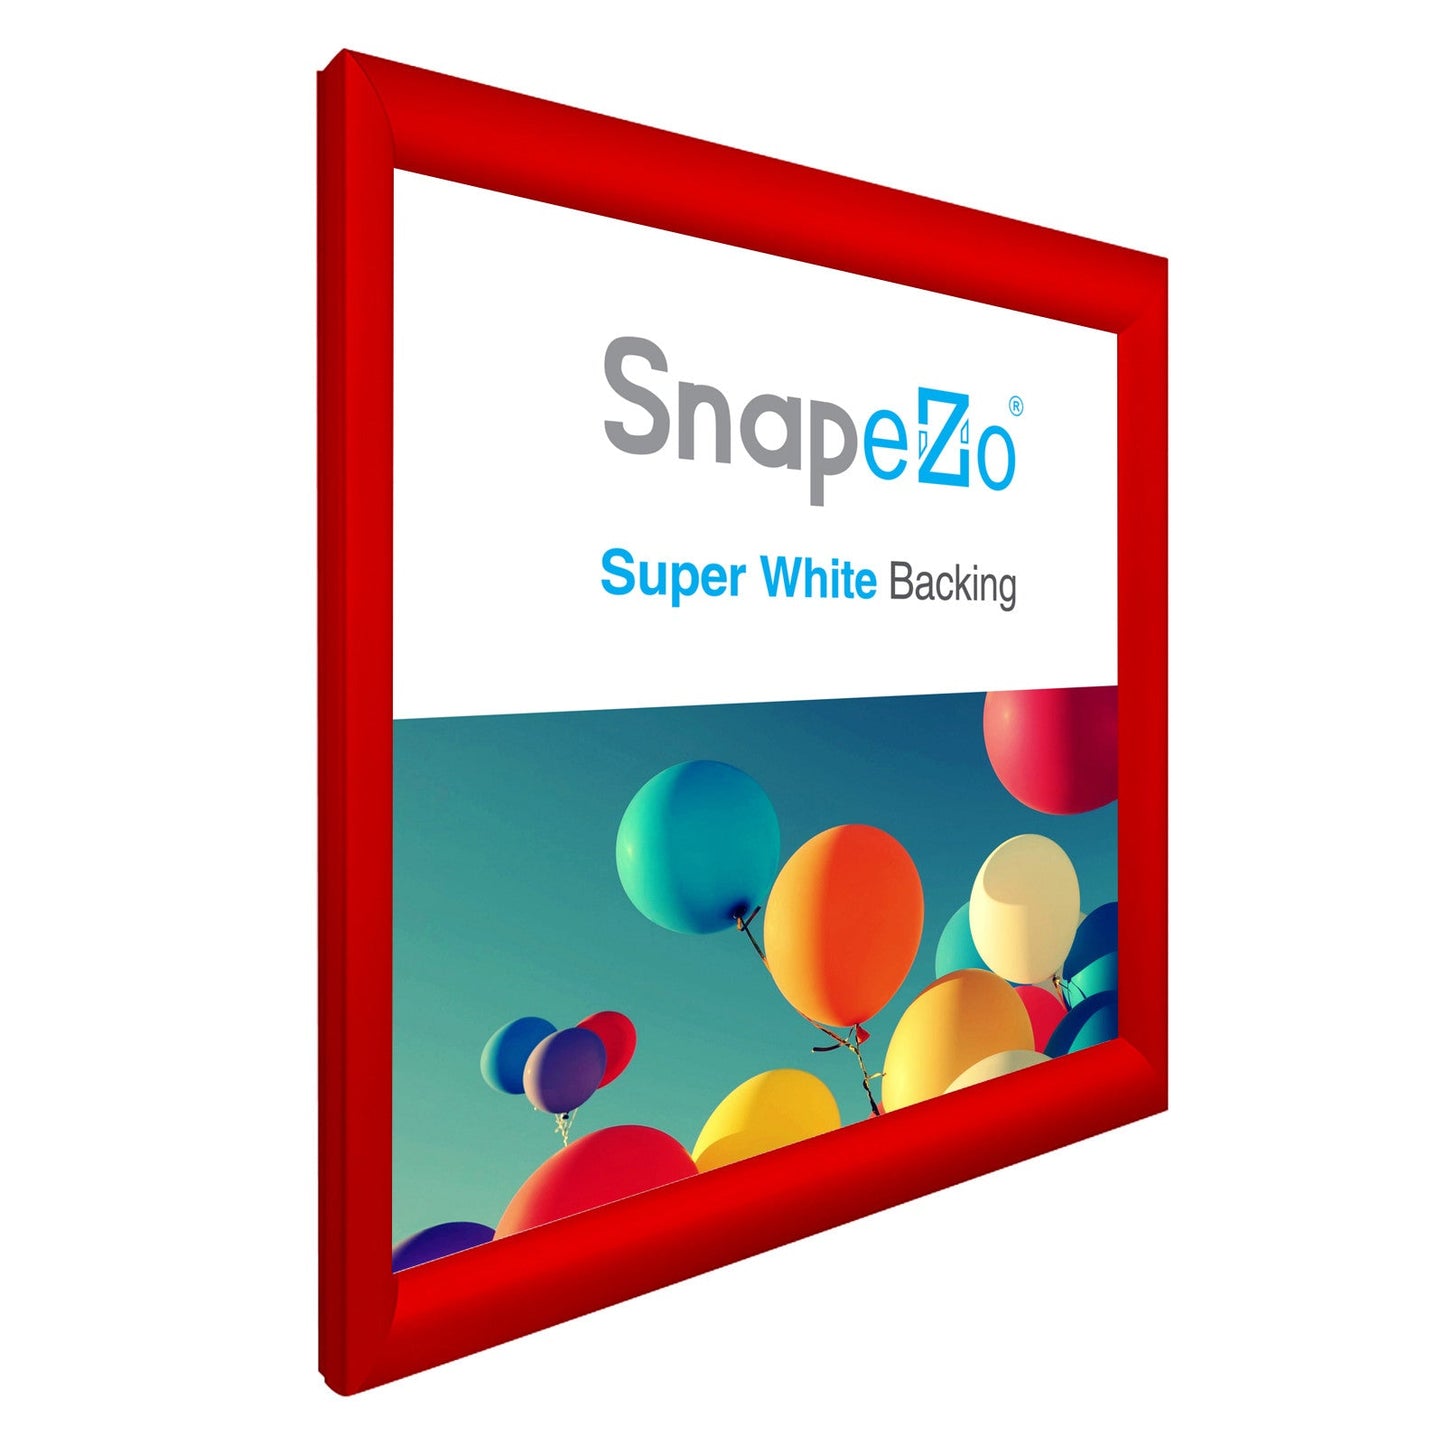 18x18 Red SnapeZo® Snap Frame - 1.2" Profile